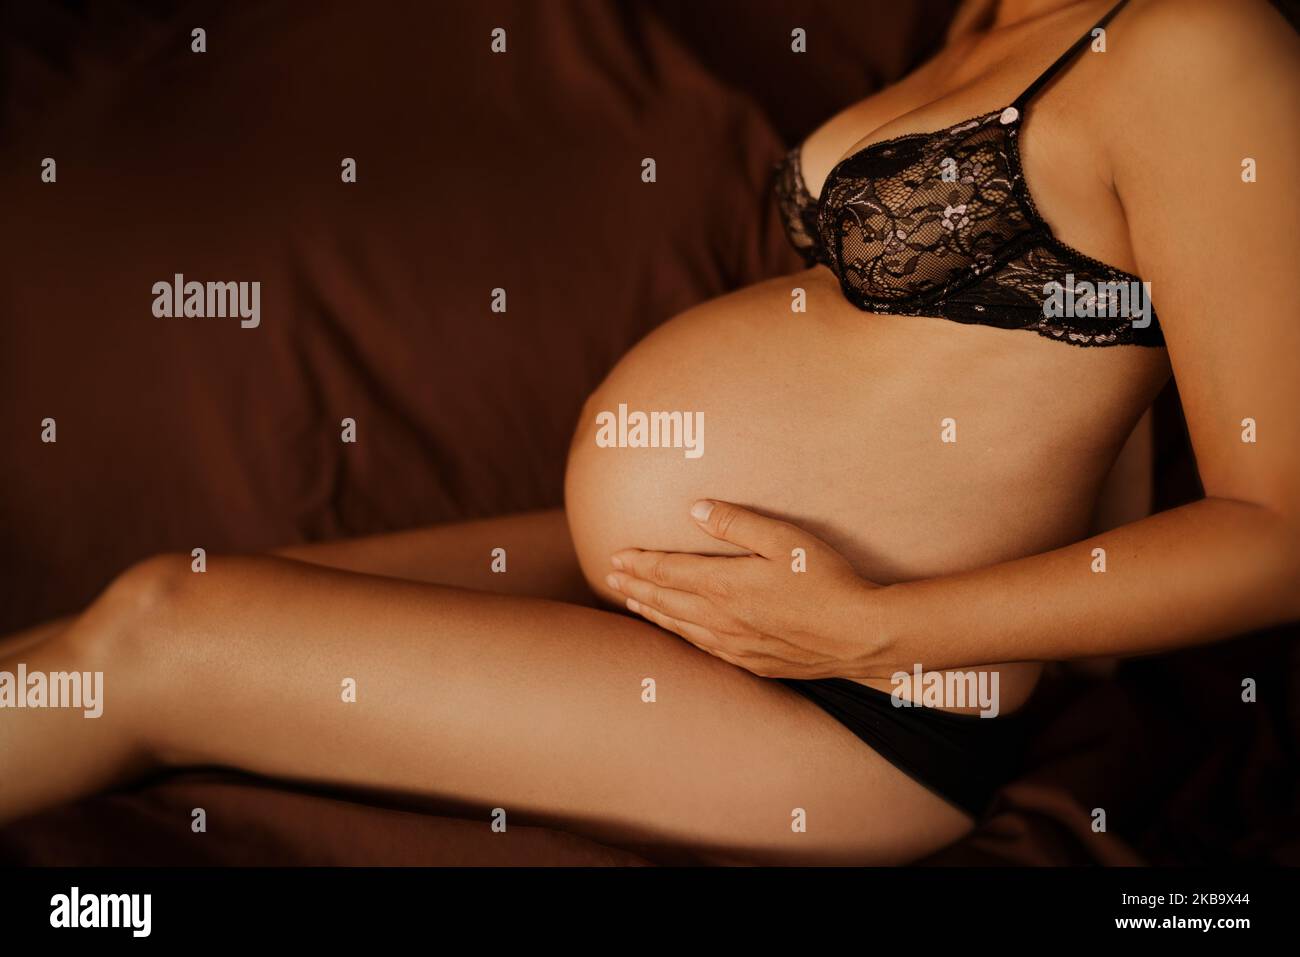 Pregnant woman pregnancy boudoir photoshoot in black lace underwear dark background. Profile body crop of lady touching expecting baby bump Stock Photo